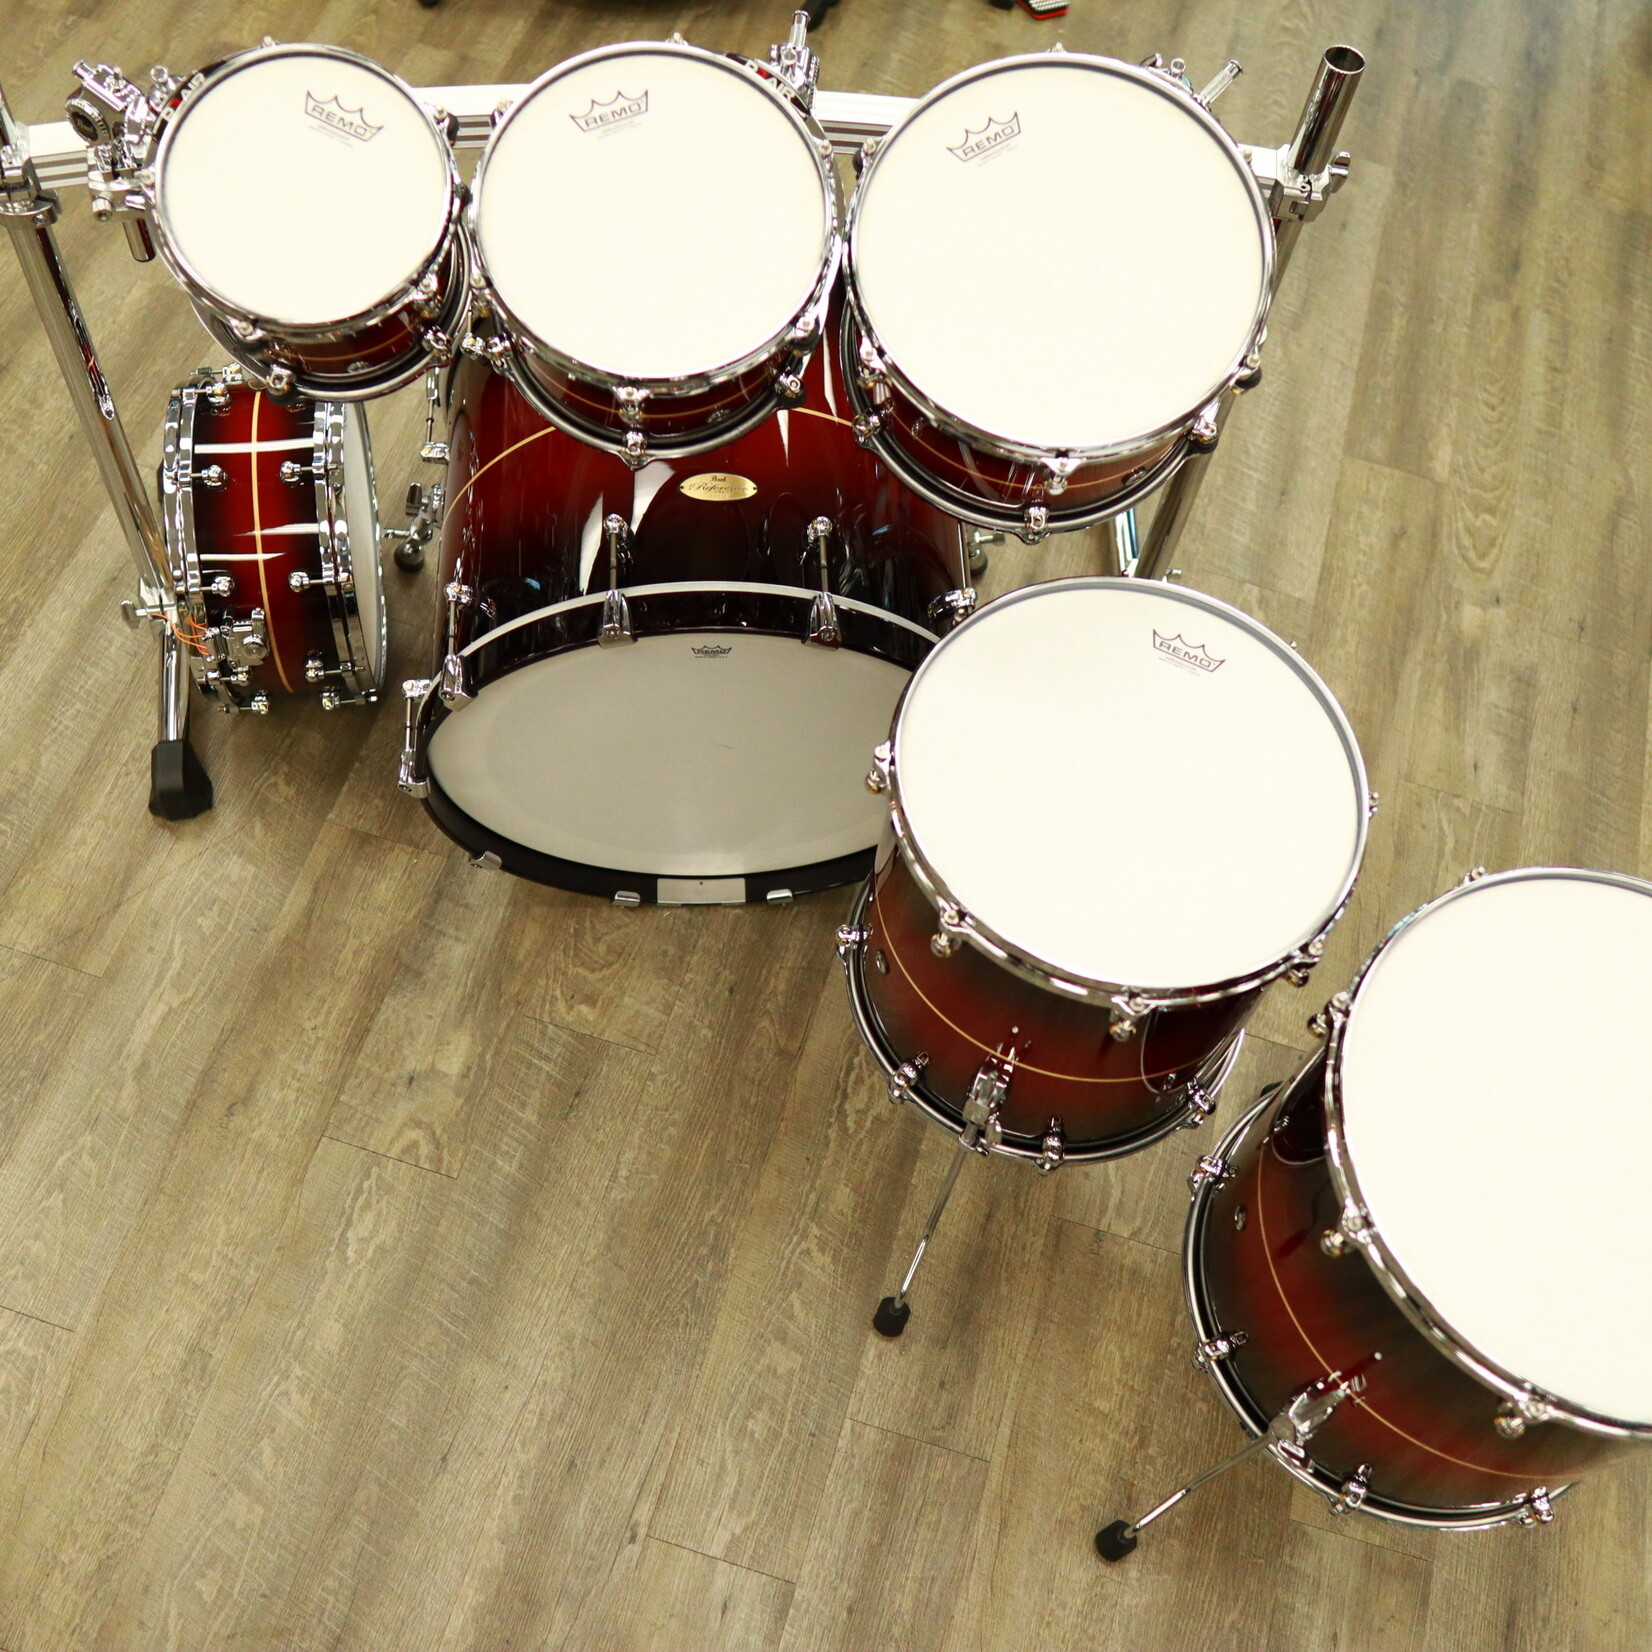 Pearl Pearl Reference One 7-Pc Shell Pack (Played by Omar Hakim) 8/10/12/14/16/22/14s (Red Burst Stripe)